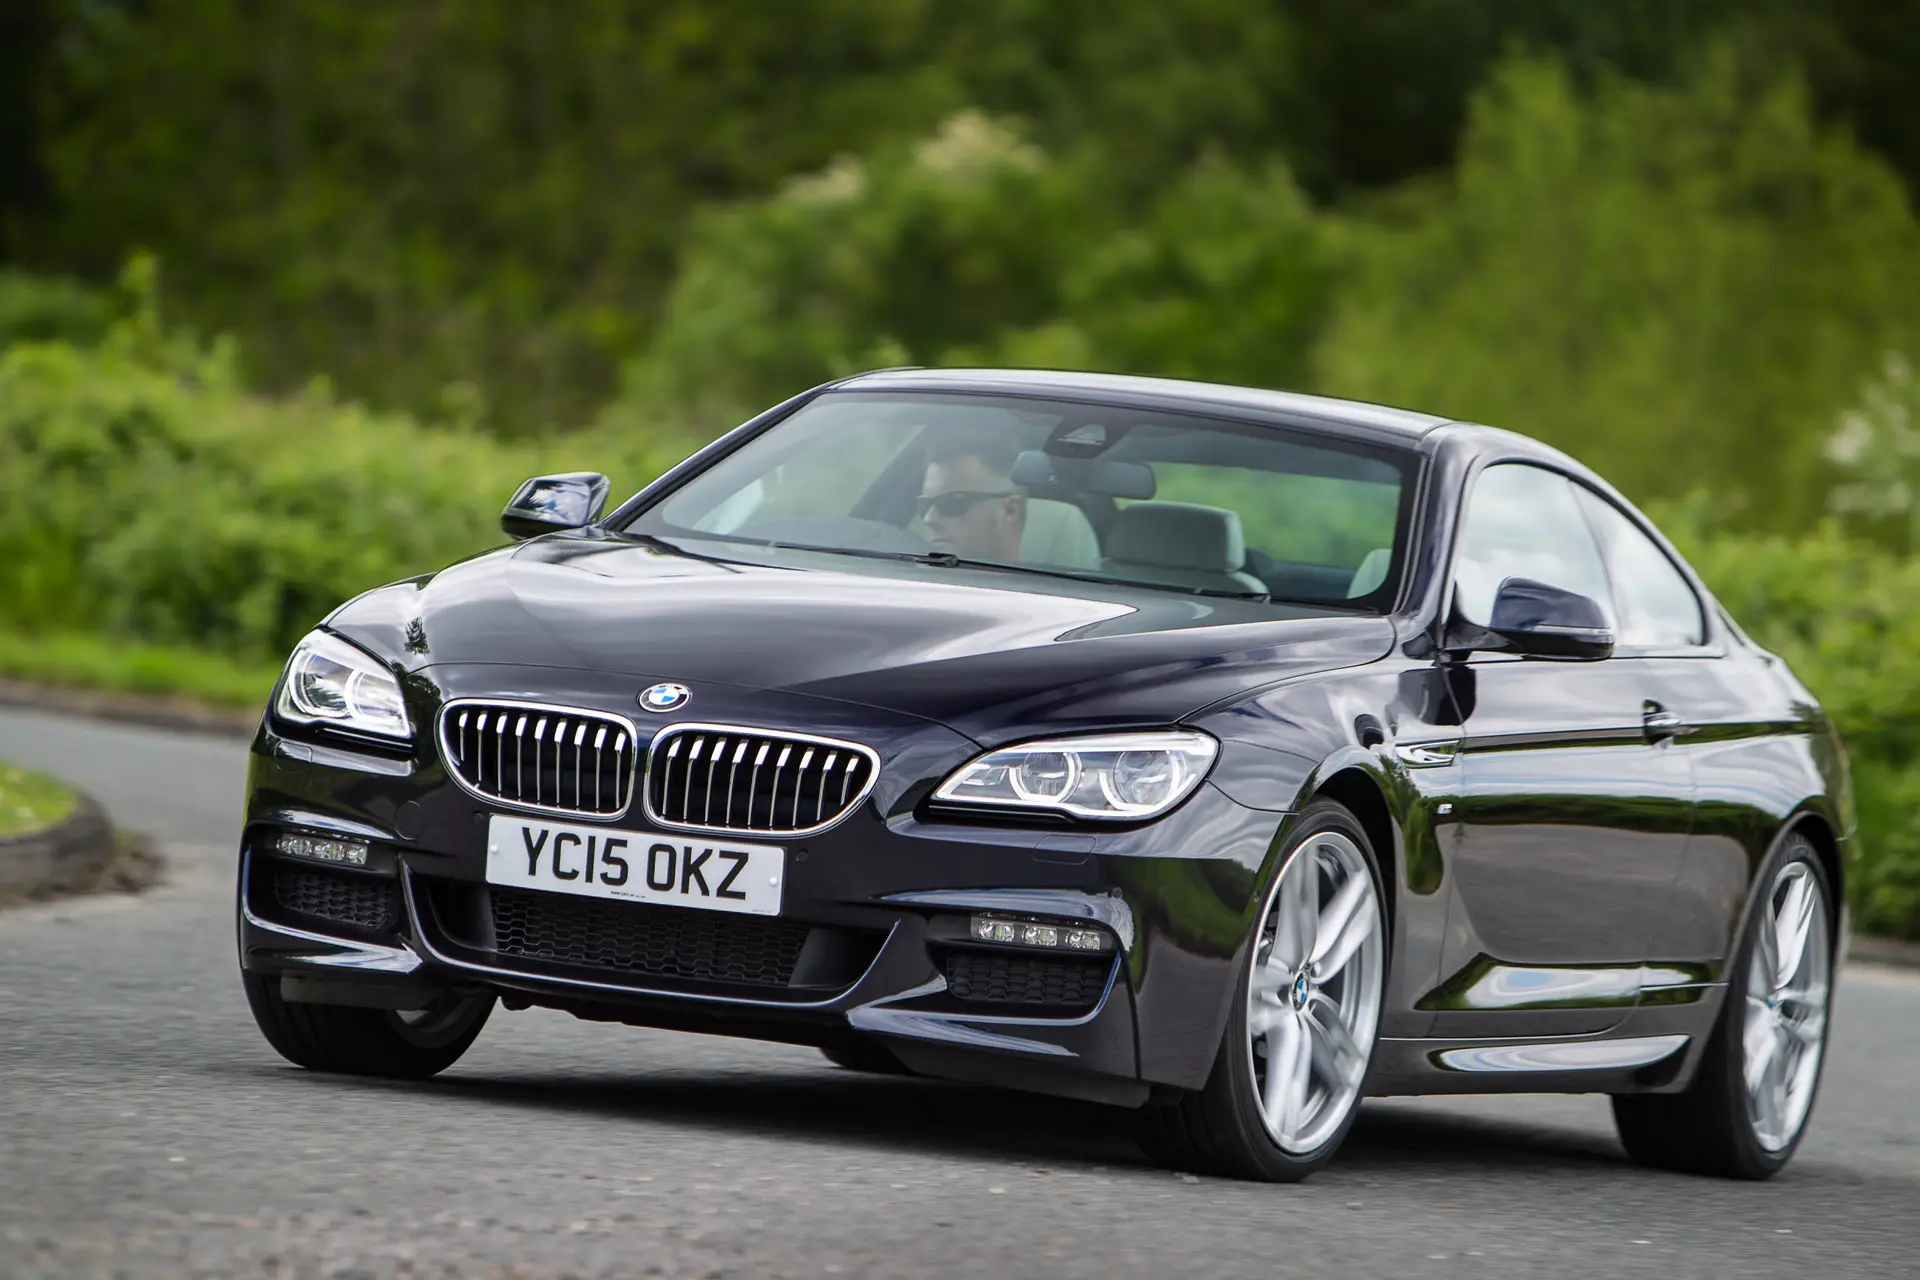 BMW 6 Series (2011-2018) Review: exterior front three quarter photo of the BMW 6 Series on the road